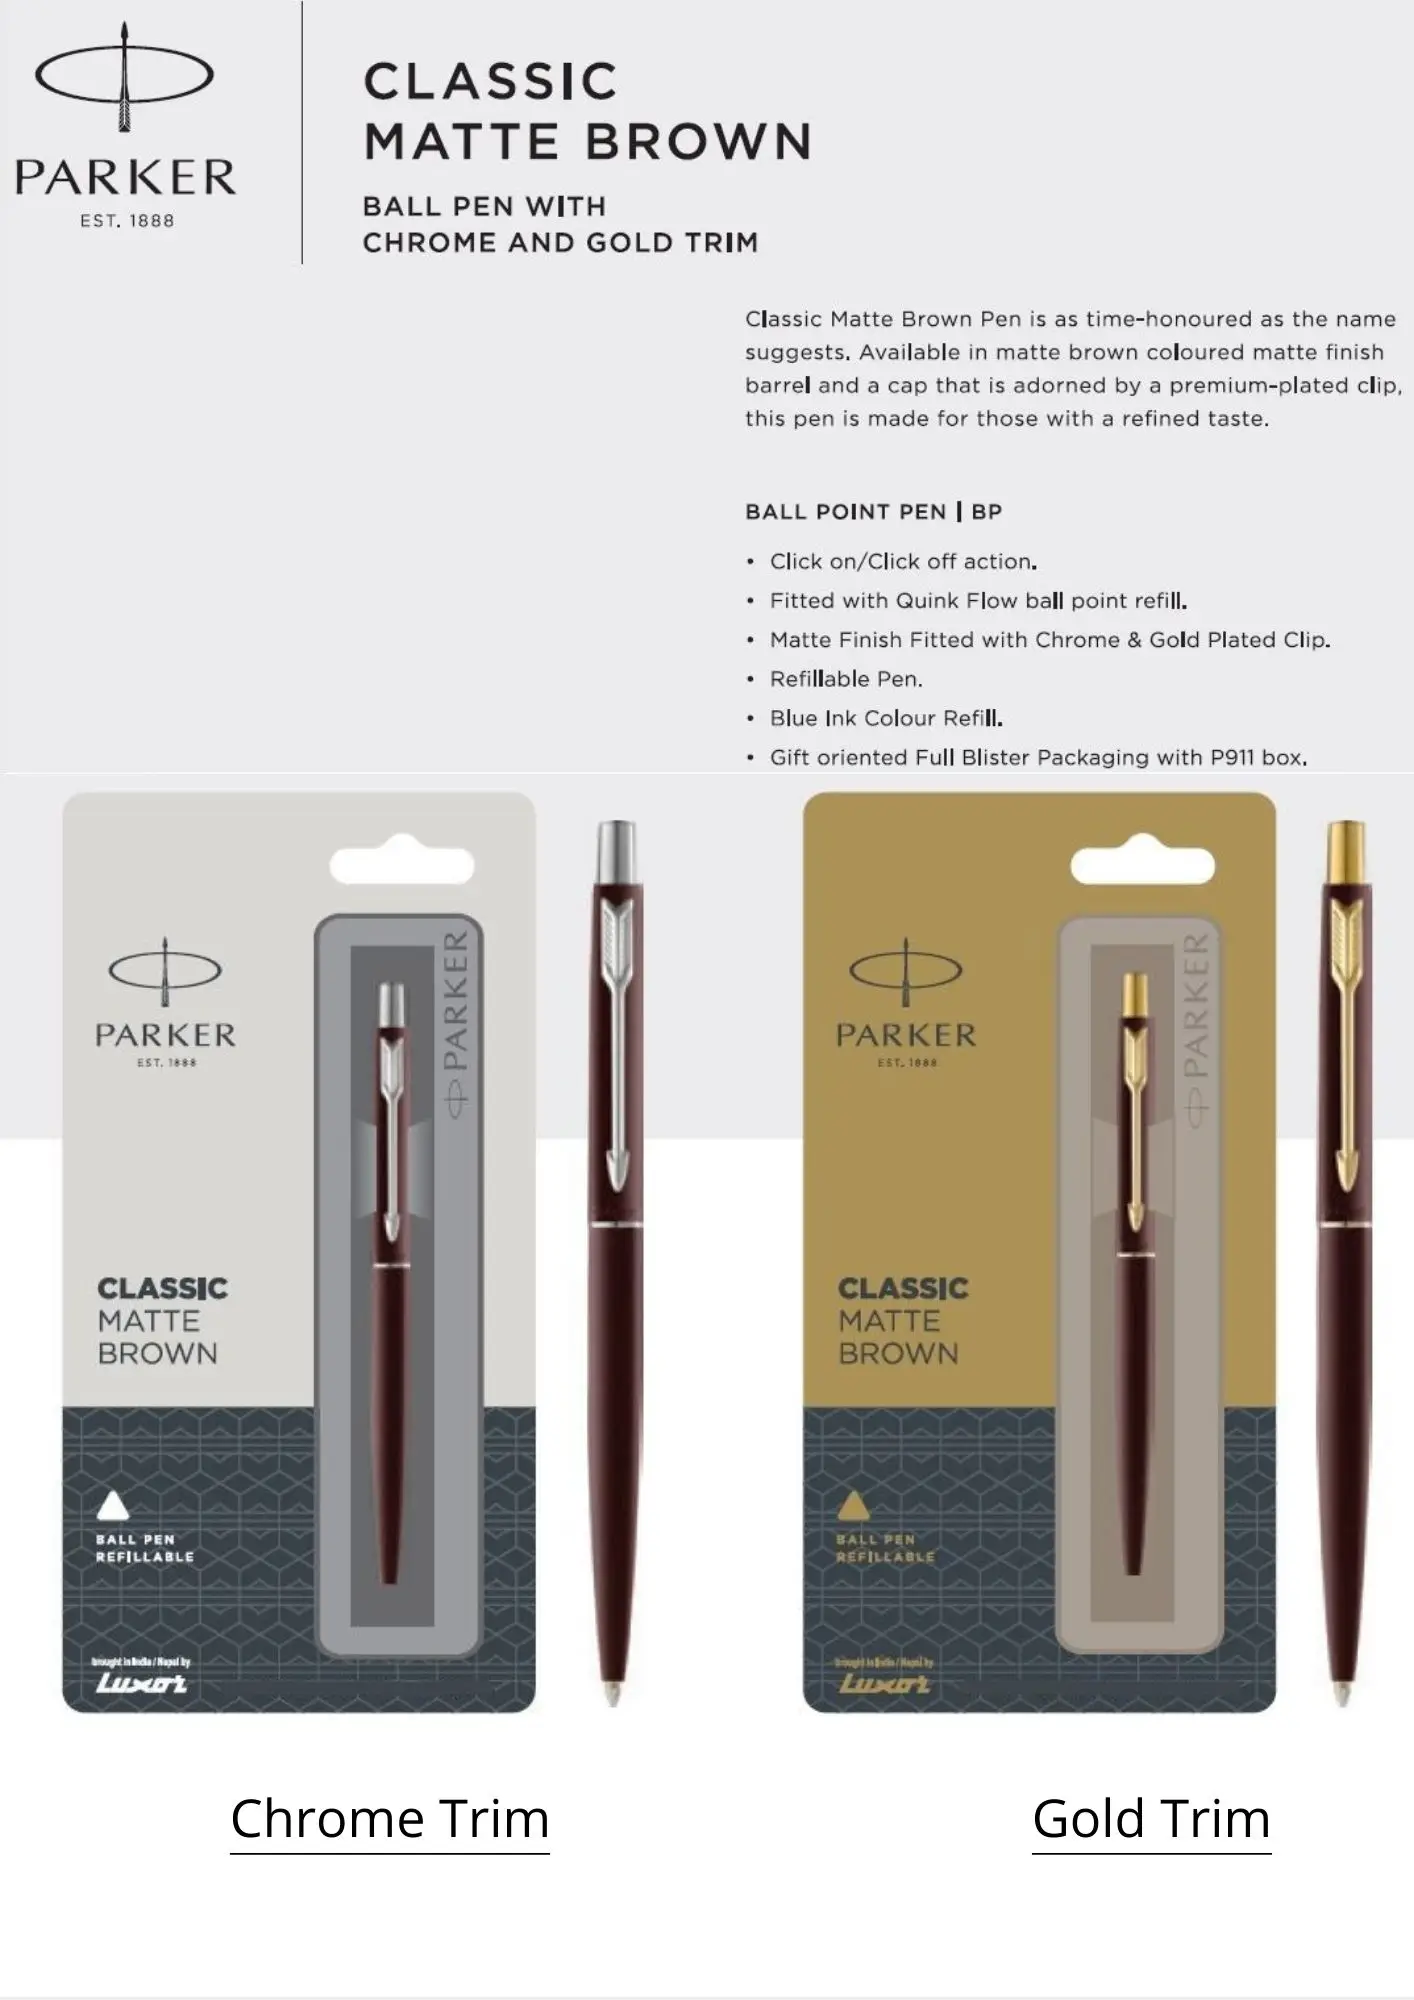 PARKER CLASSIC MATTE BROWN BALL PEN WITH CHROME AND GOLD TRIM BLUE INK 